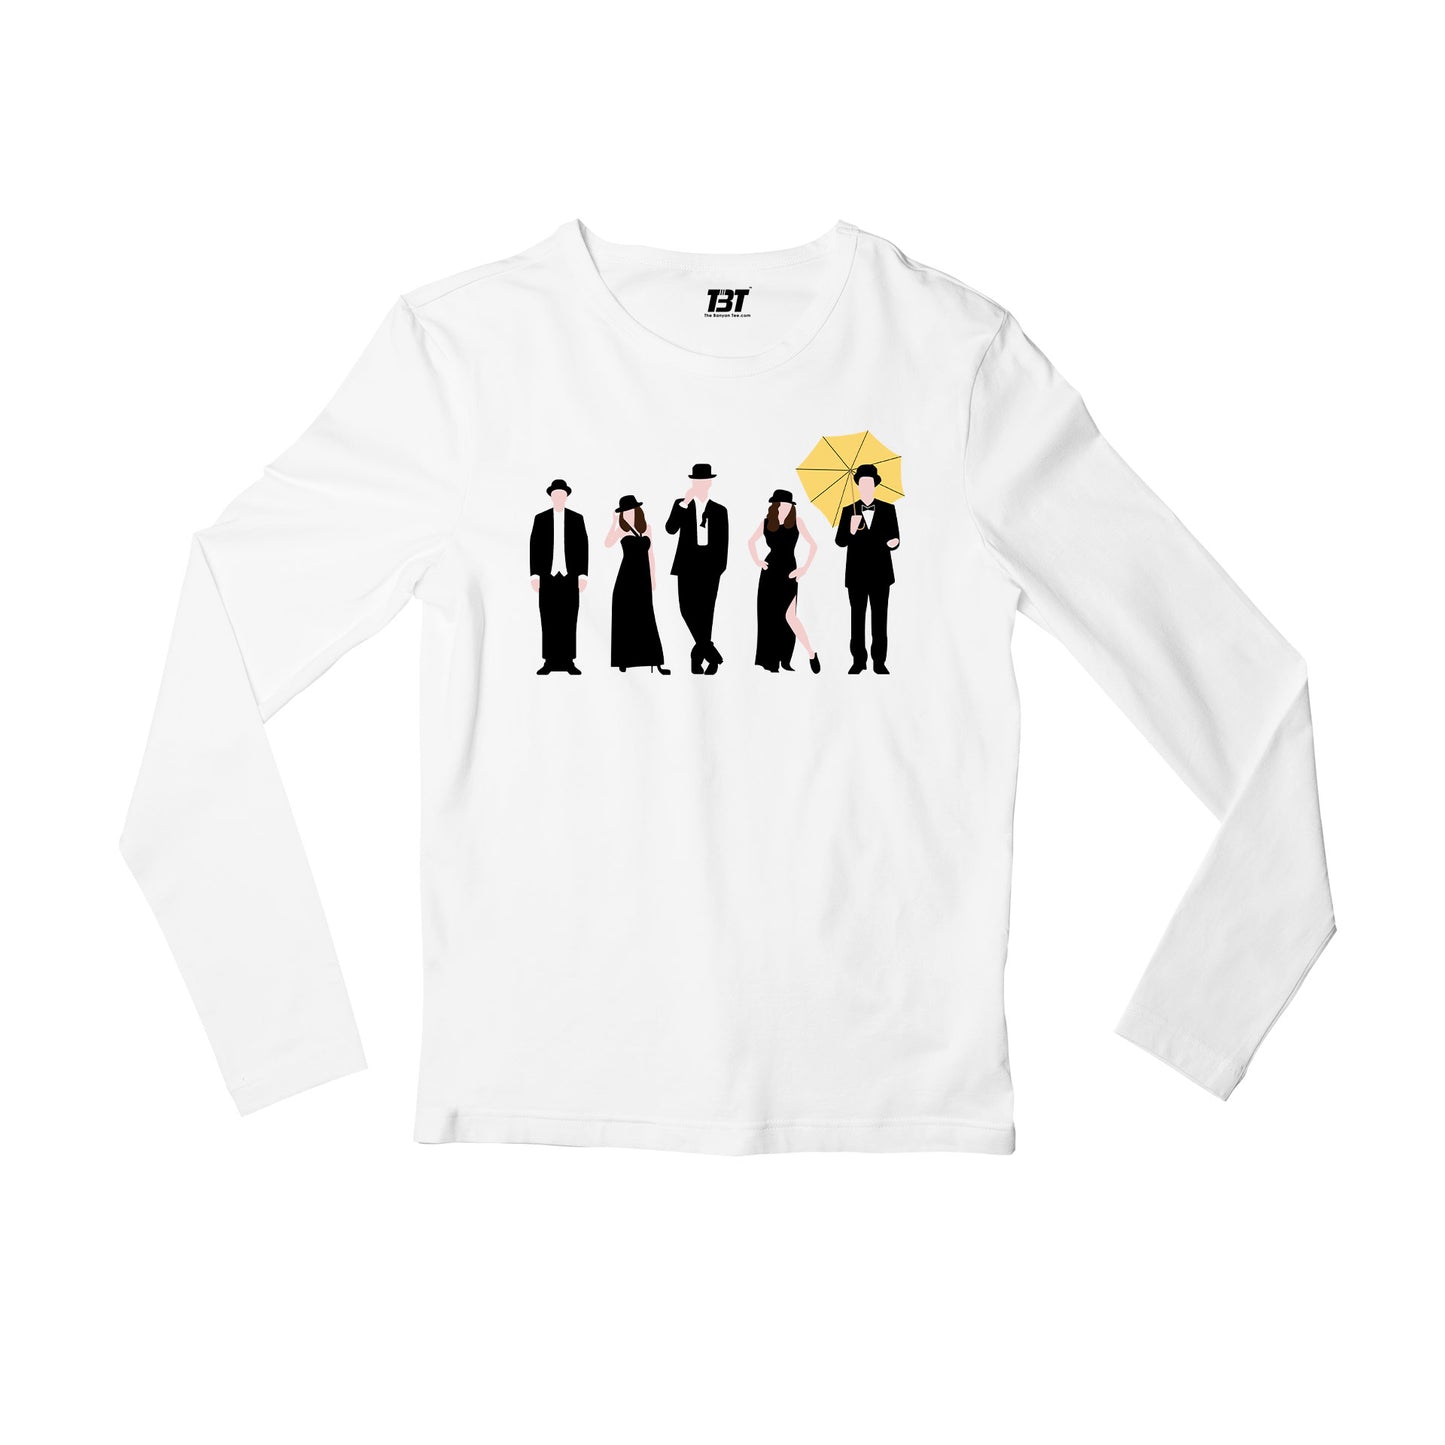 How I Met Your Mother Full Sleeves T-shirt - Full Sleeves T-shirt The Banyan Tee TBT